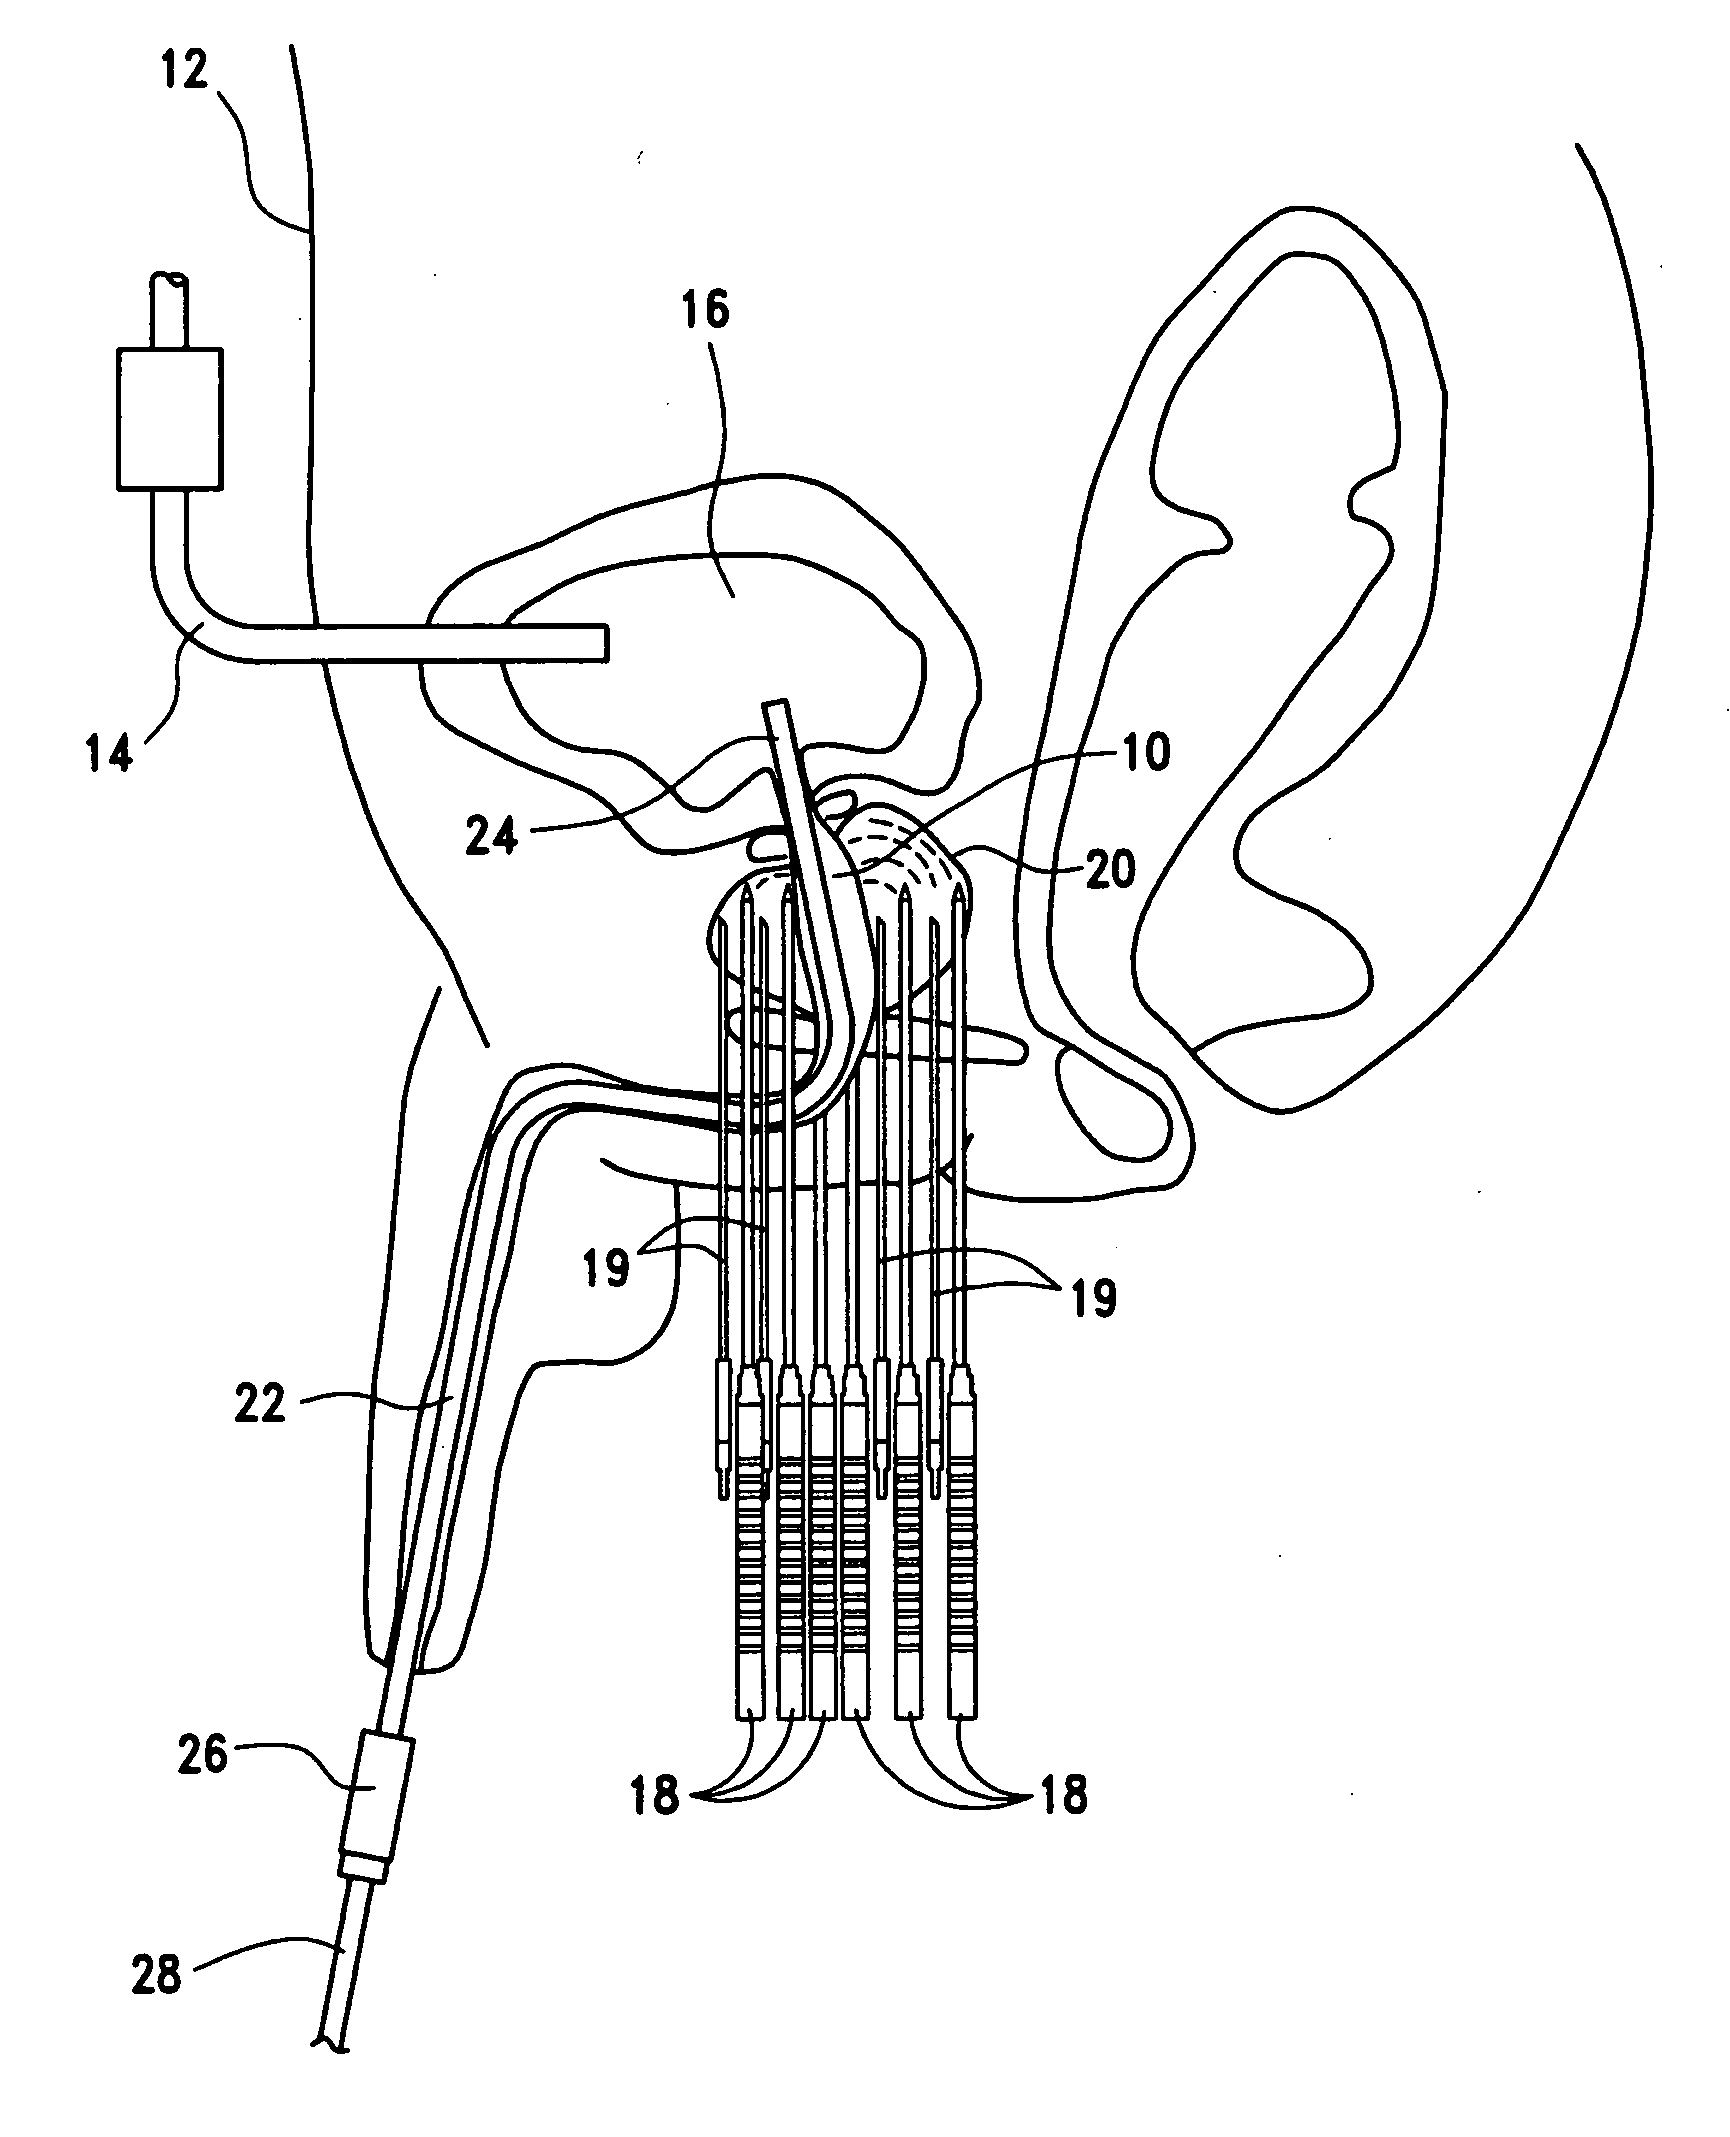 Open system heat exchange catheters and methods of use